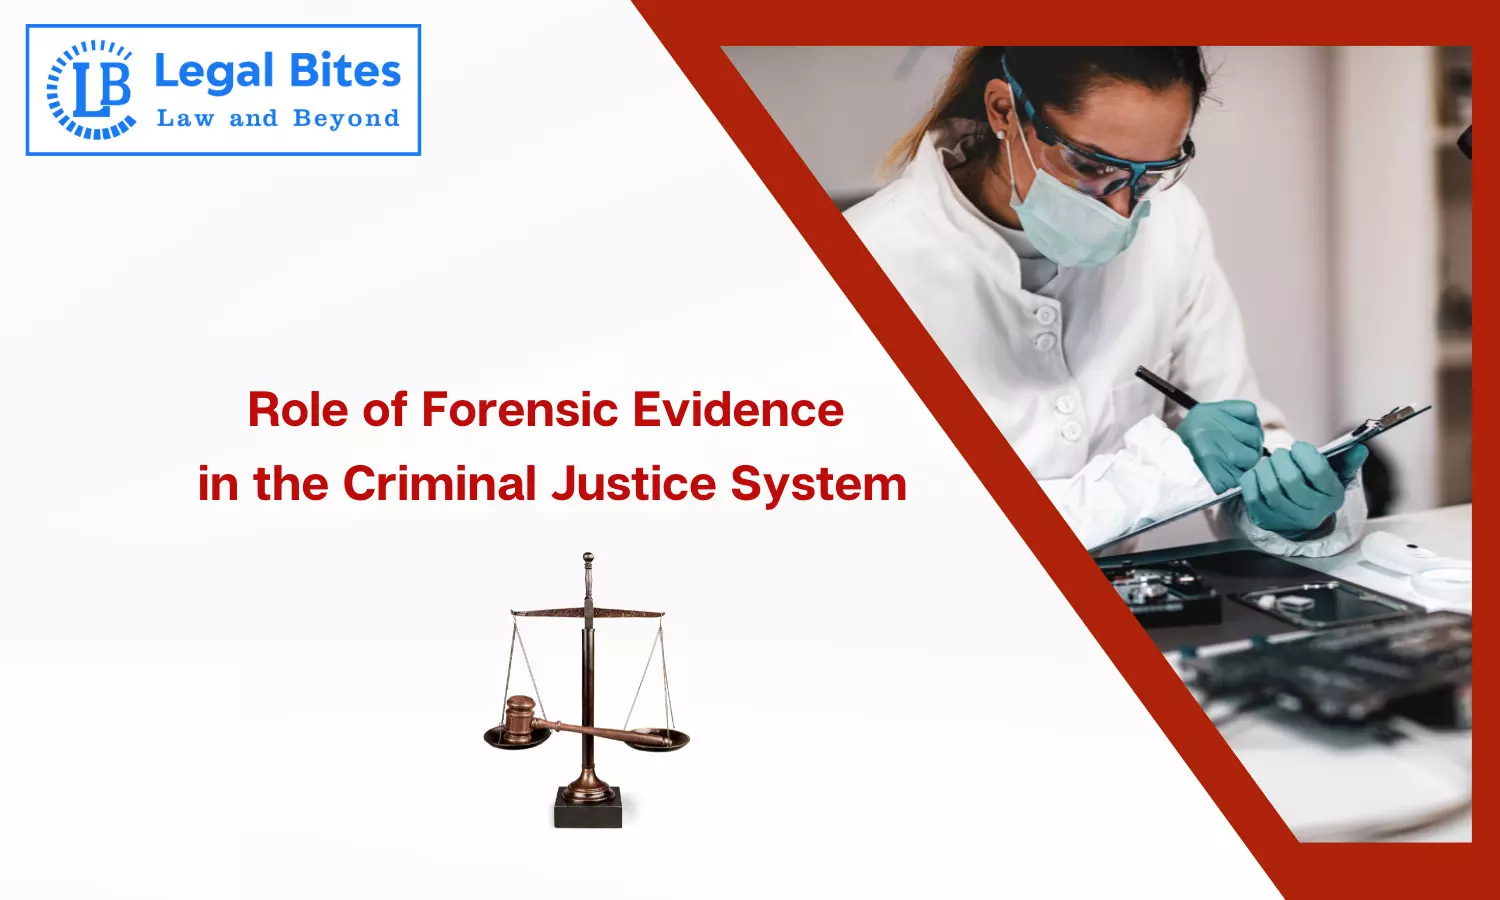 Role of Forensic Evidence in the Criminal Justice System